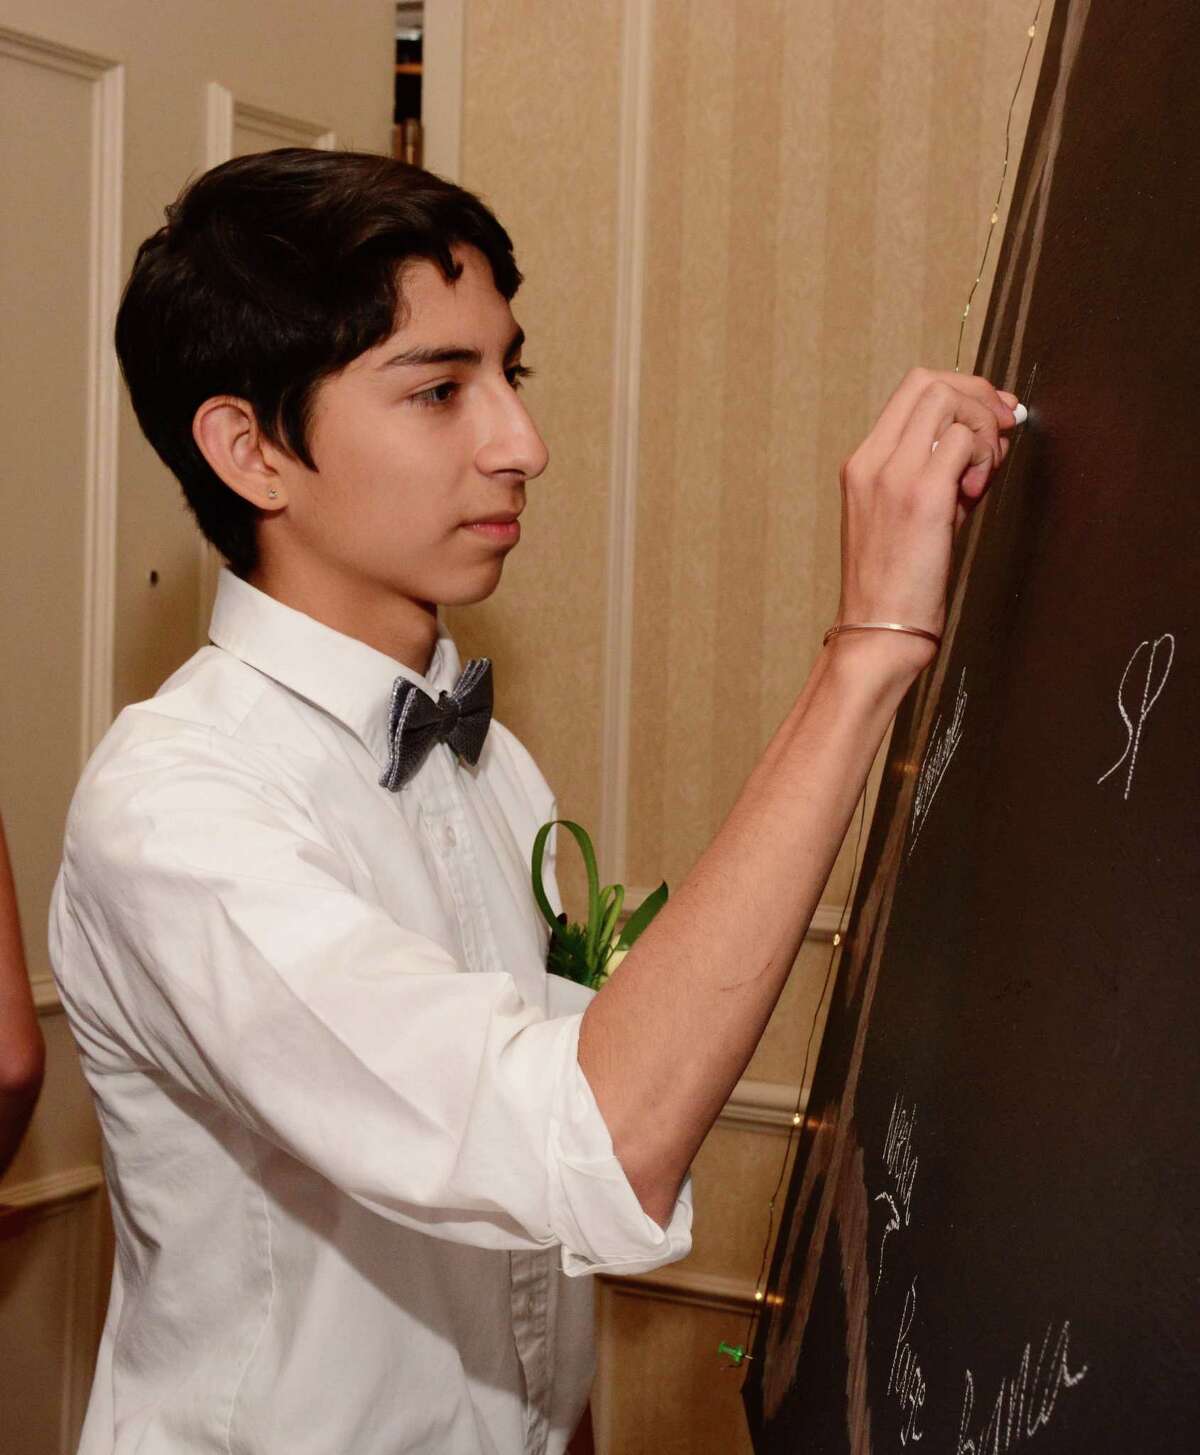 Arturo Ortega, 16, from Washington signs the board at the Shepaug Valley High School prom at Wyndam in Southbury on Saturday May 27, 2017.